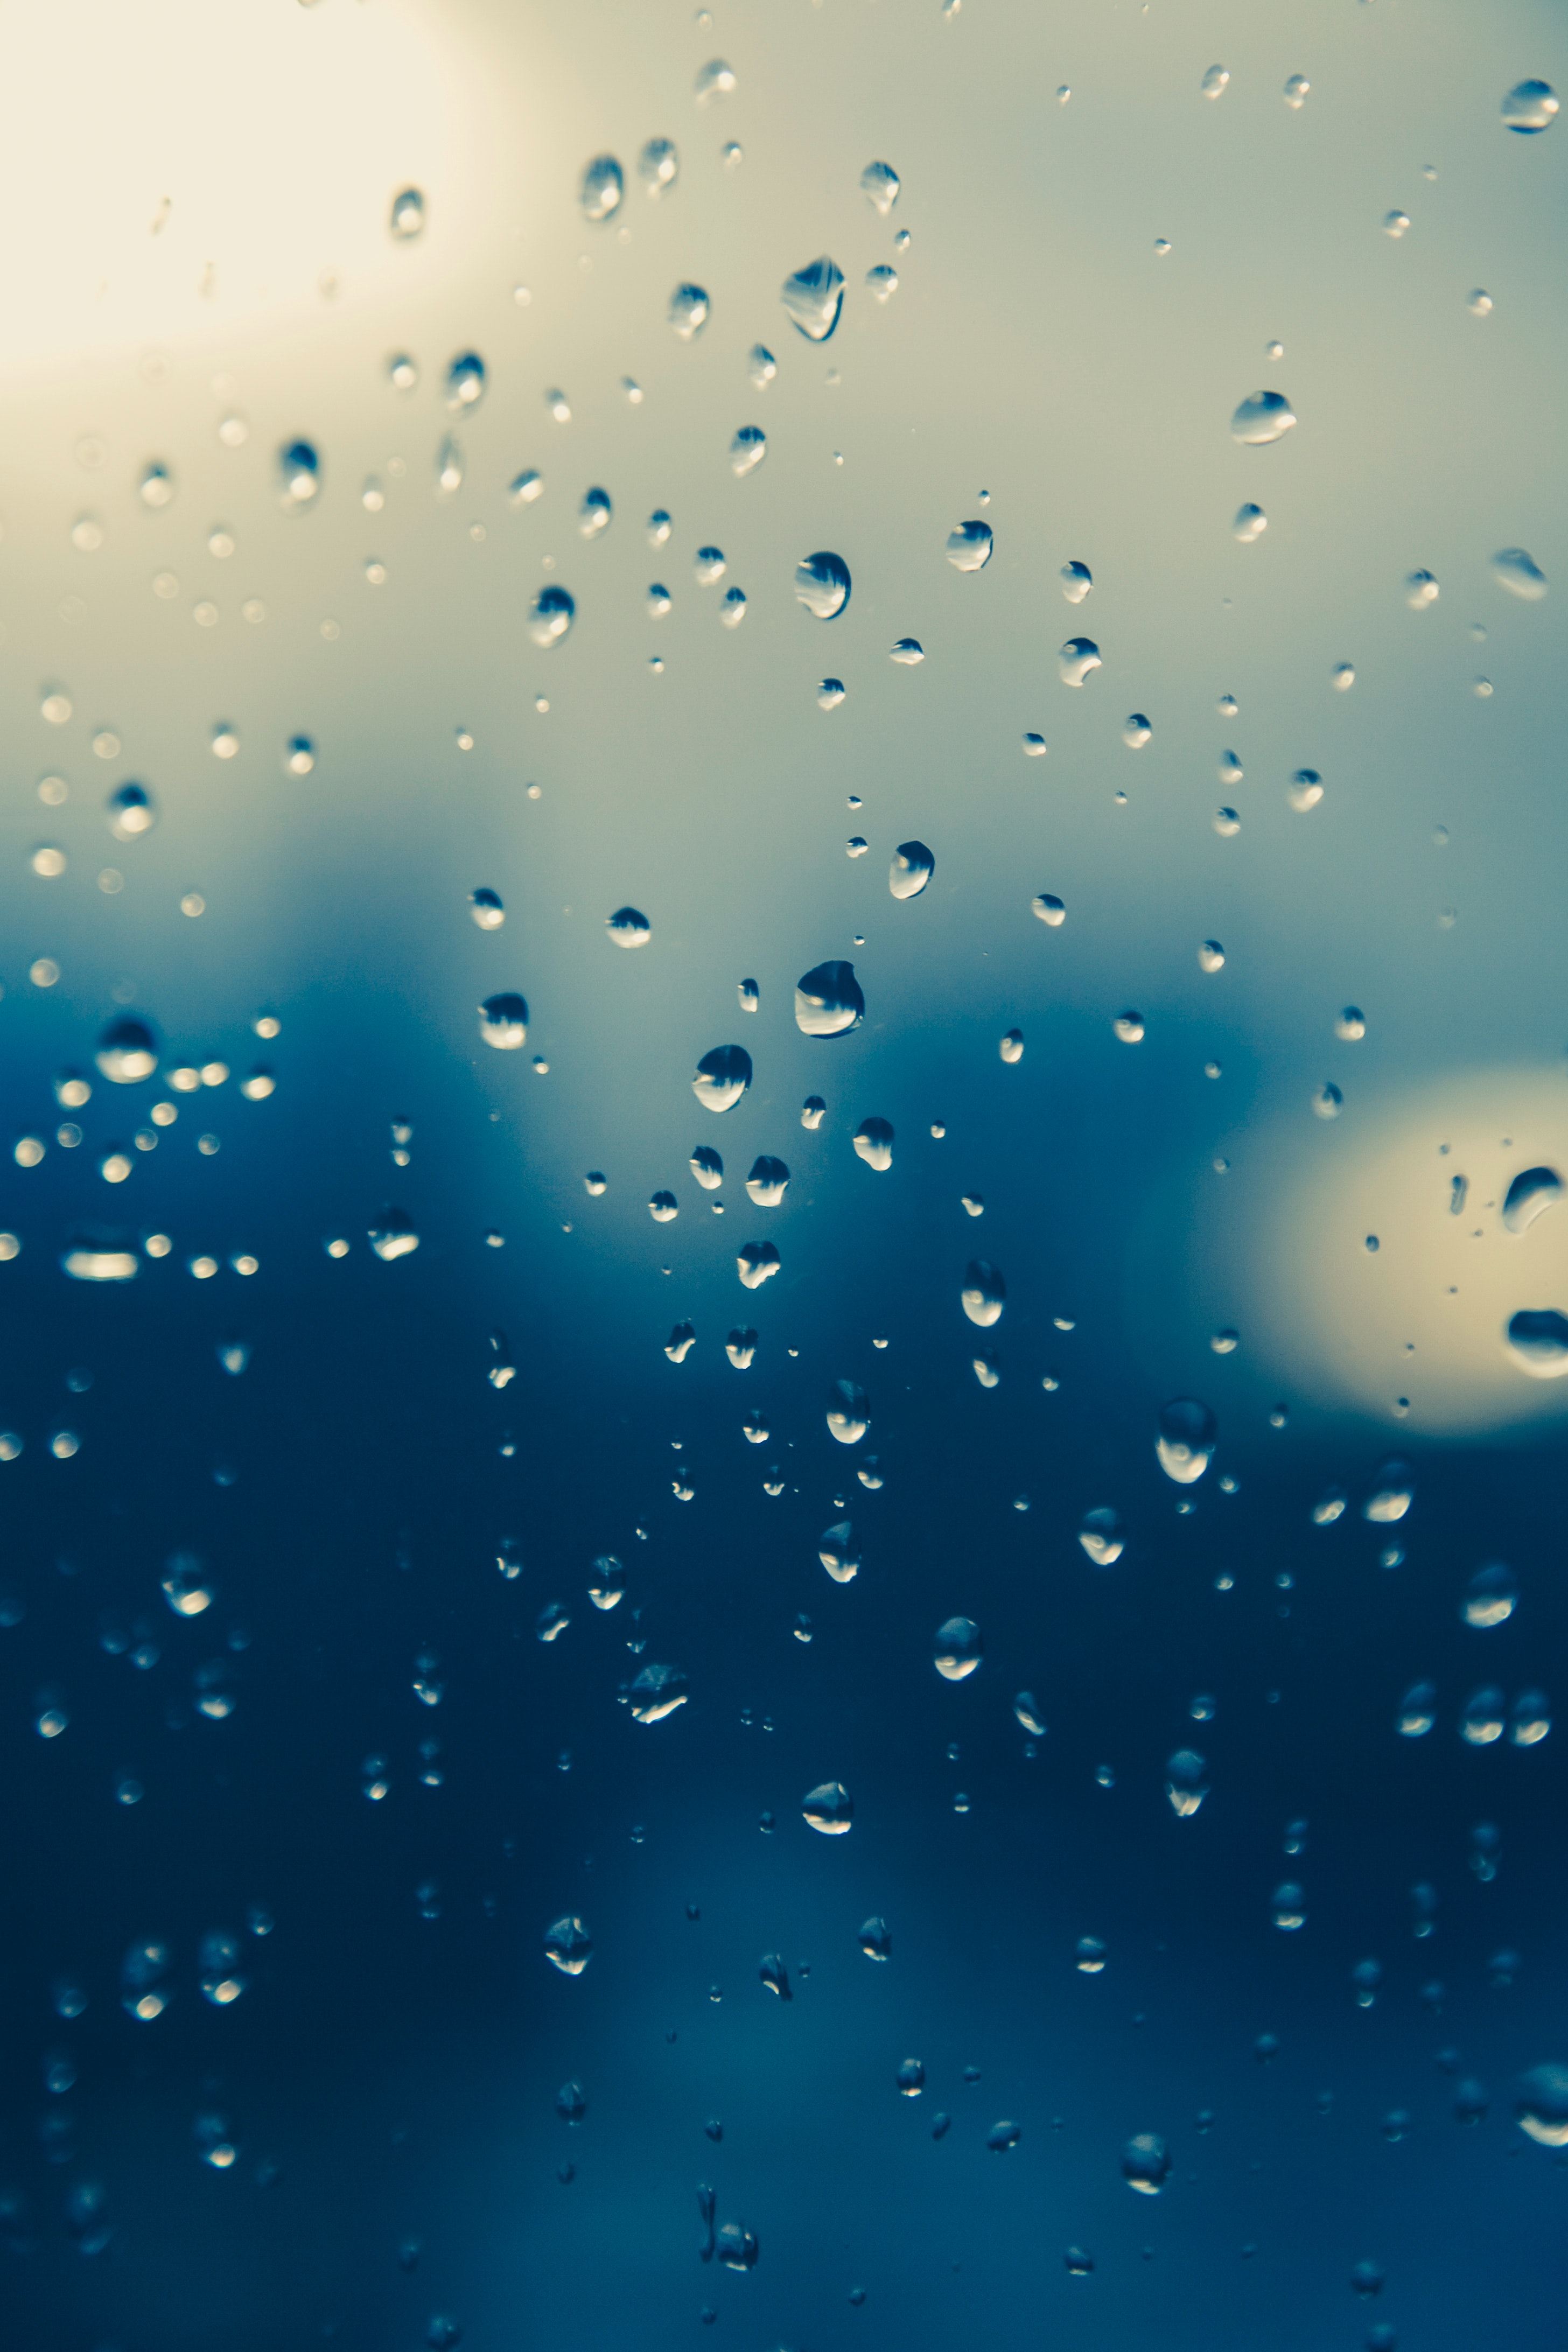 Best Free Raindrops & Image · 100% Royalty Free HD Downloads